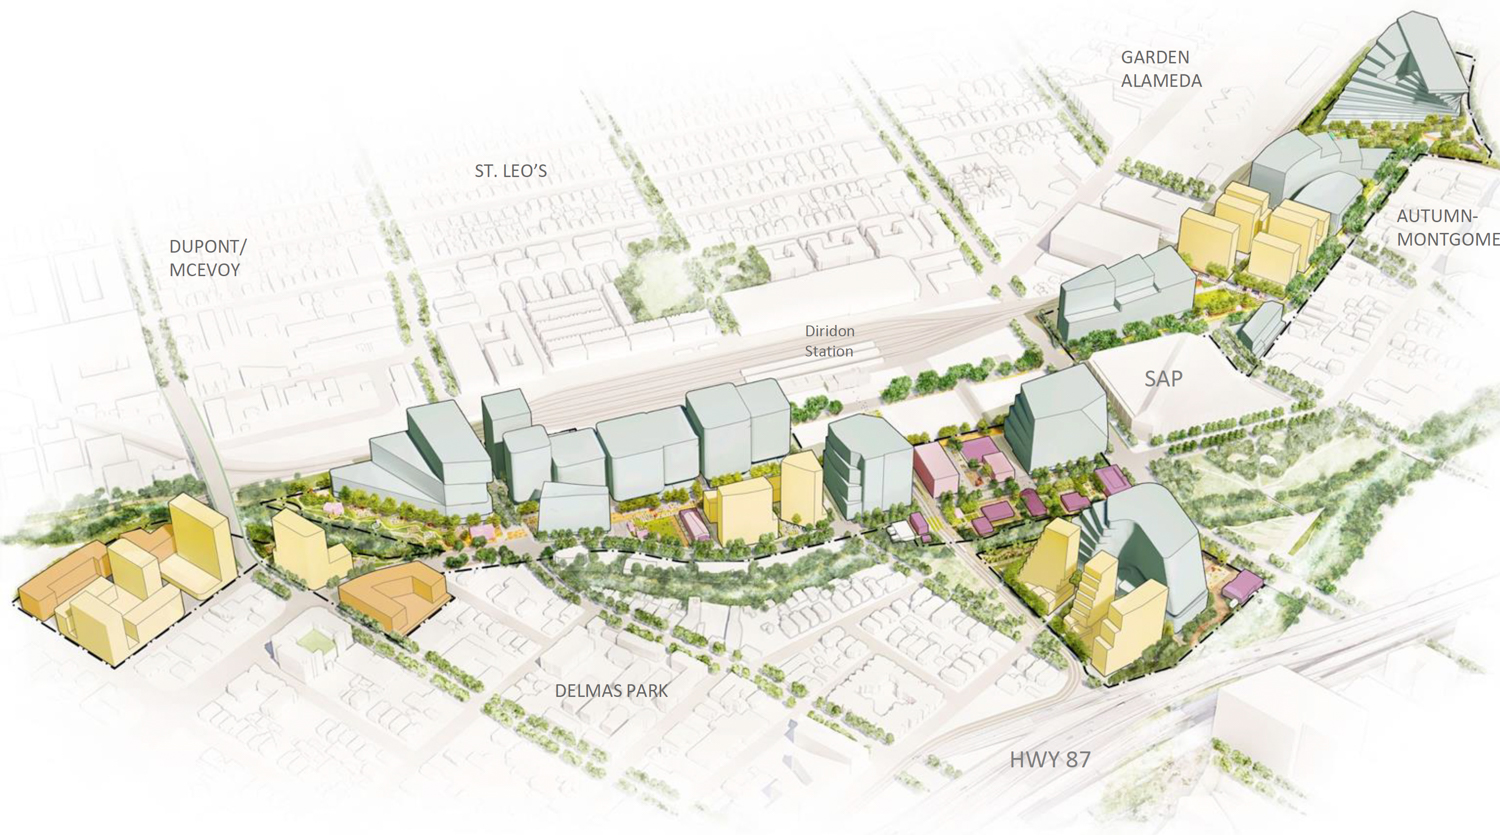 Downtown West master plan view, image via planning presentation